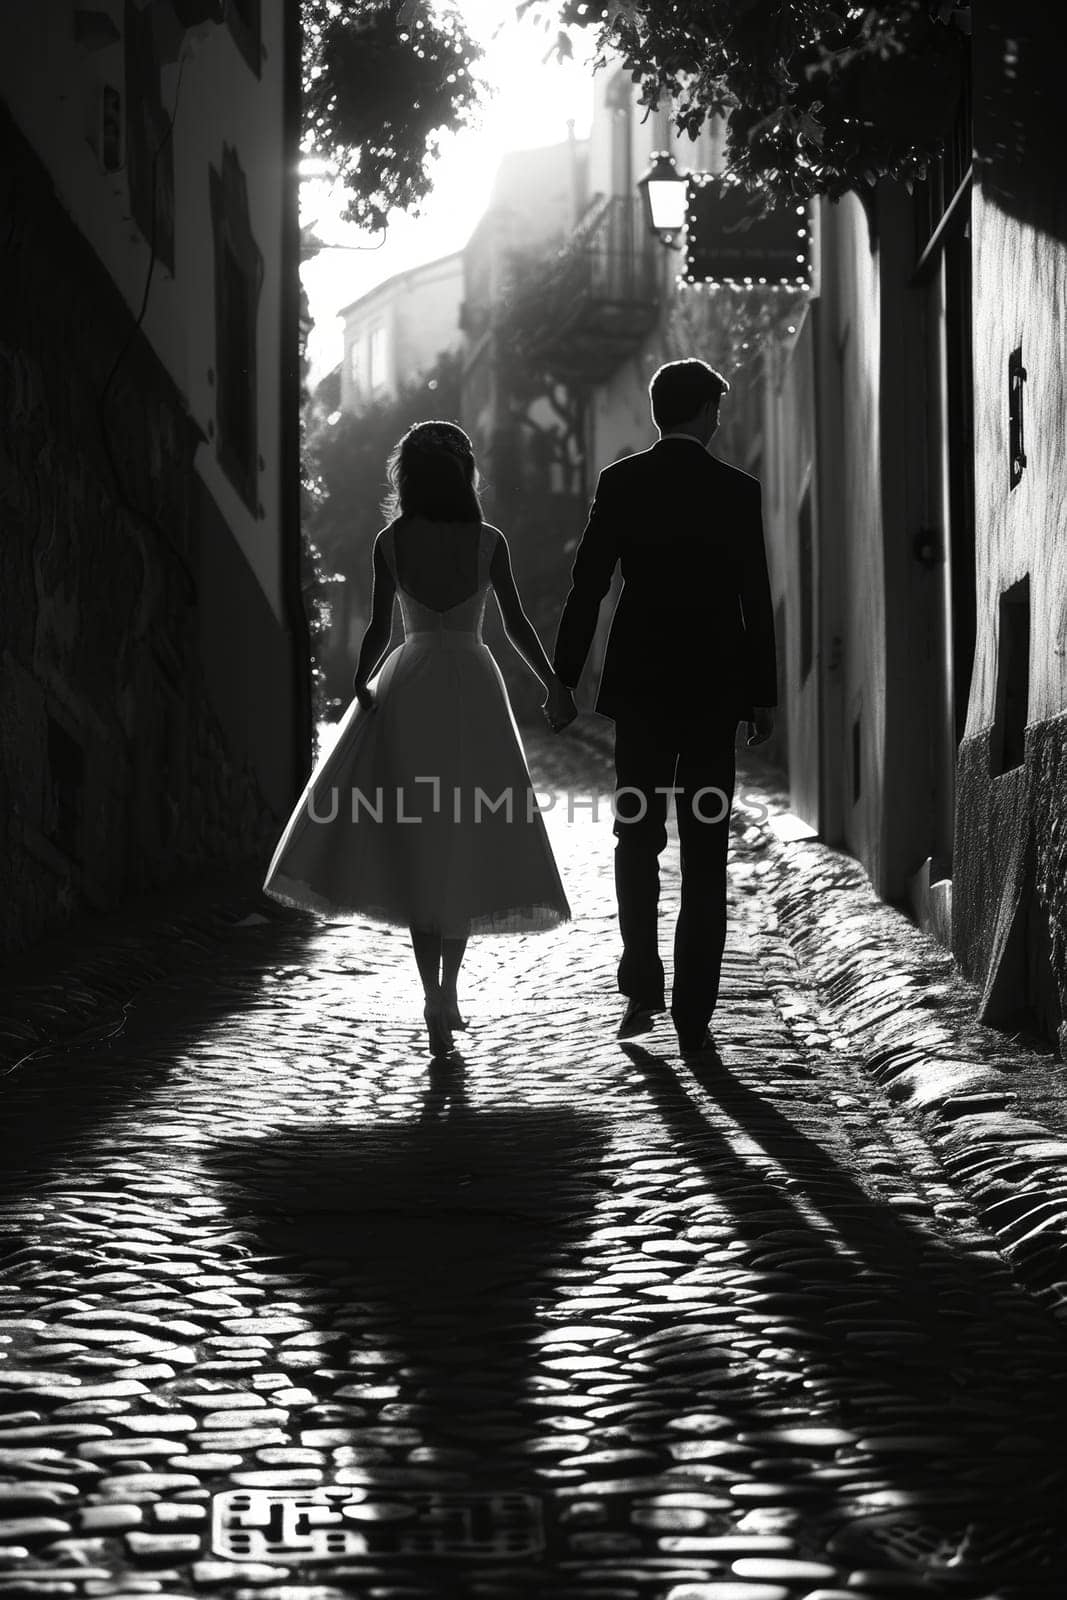 Black and white image of bride and groom holding hands and walking on a cobblestone street, capturing a moment of marital bliss. by sfinks